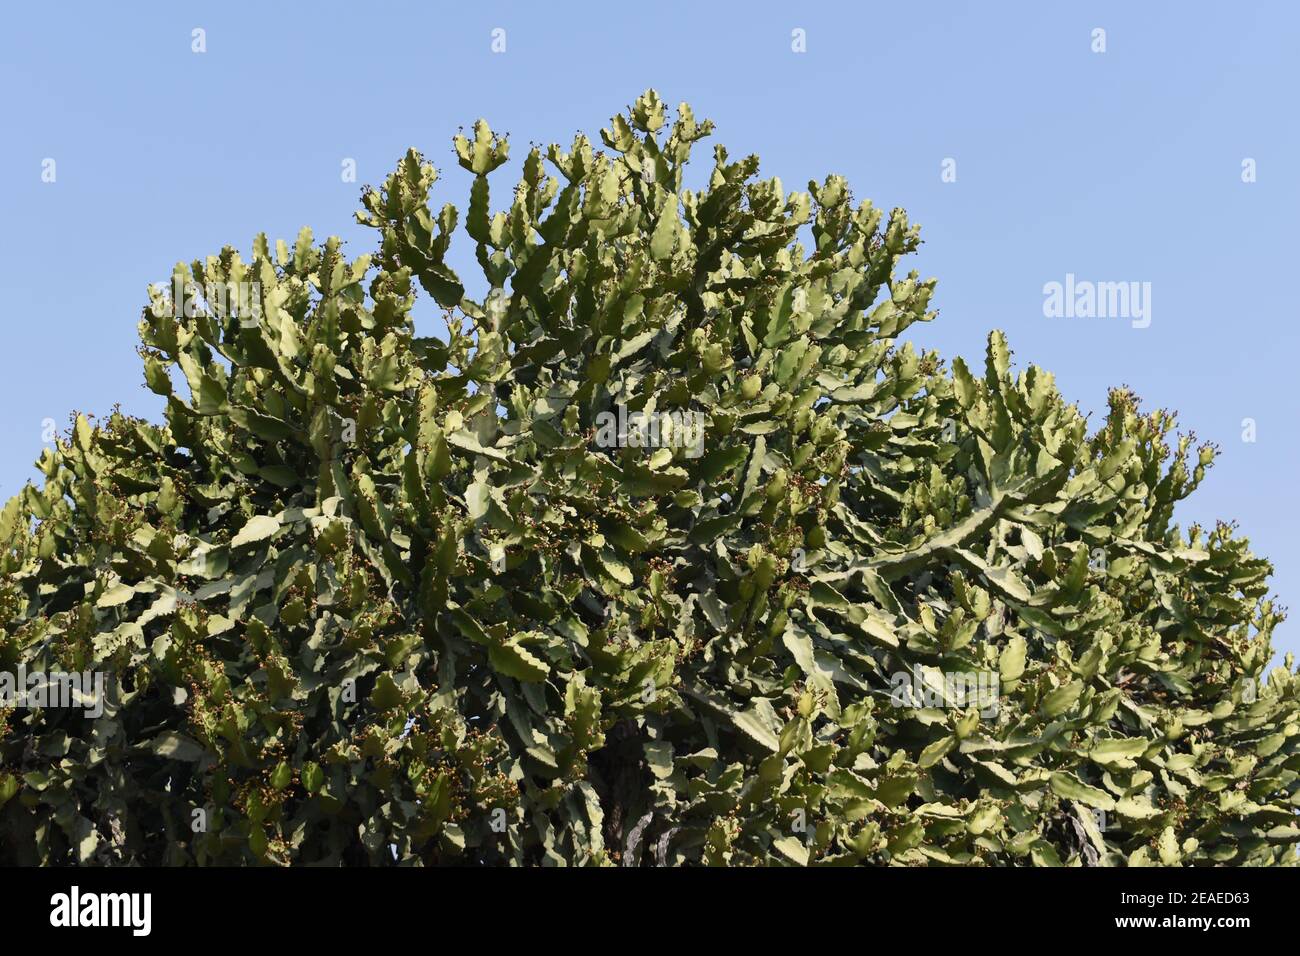 Transvaal candelabra tree branches against the blue sky. Stock Photo